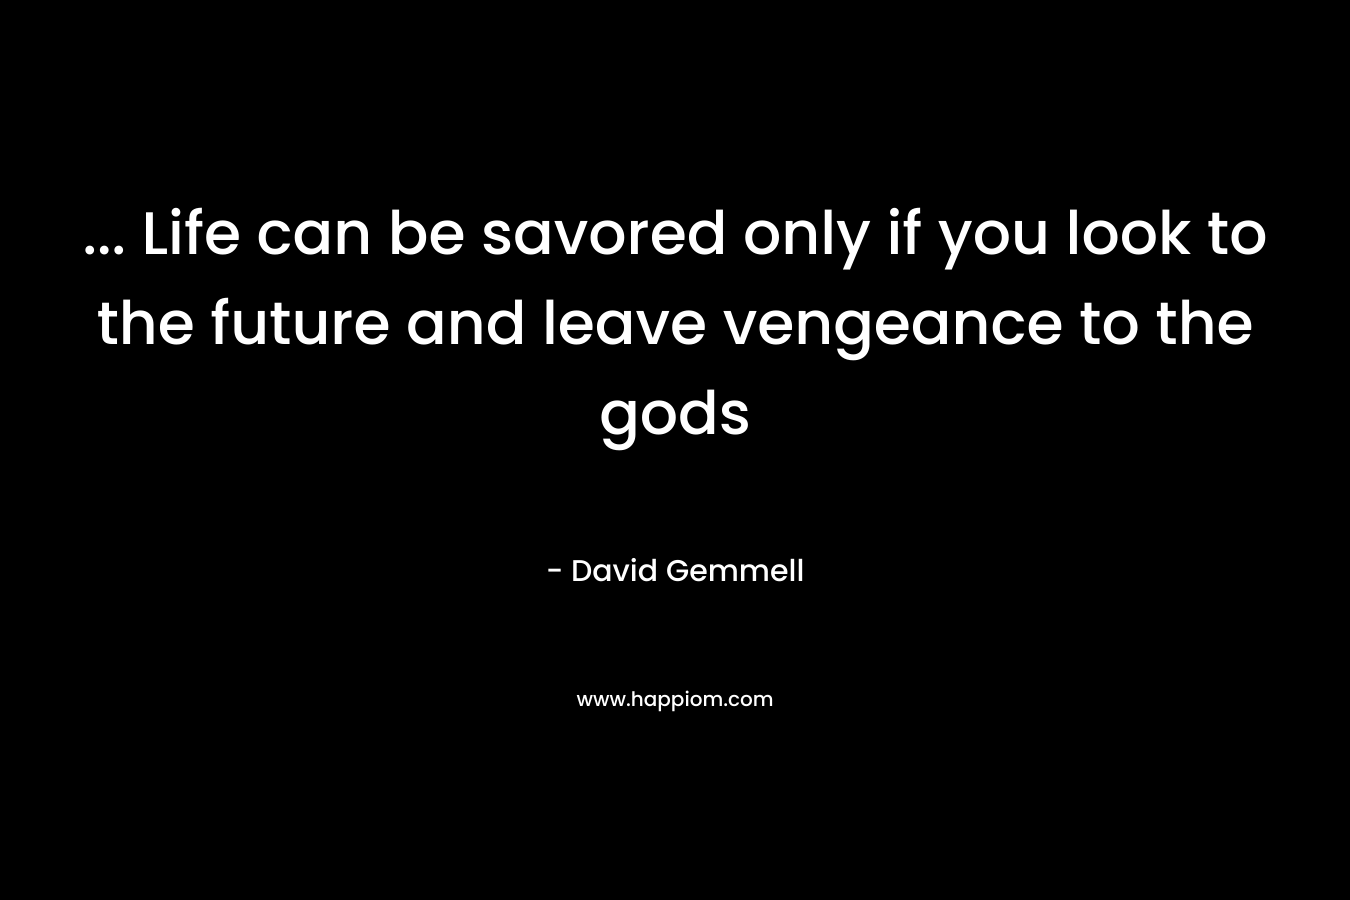 … Life can be savored only if you look to the future and leave vengeance to the gods – David Gemmell